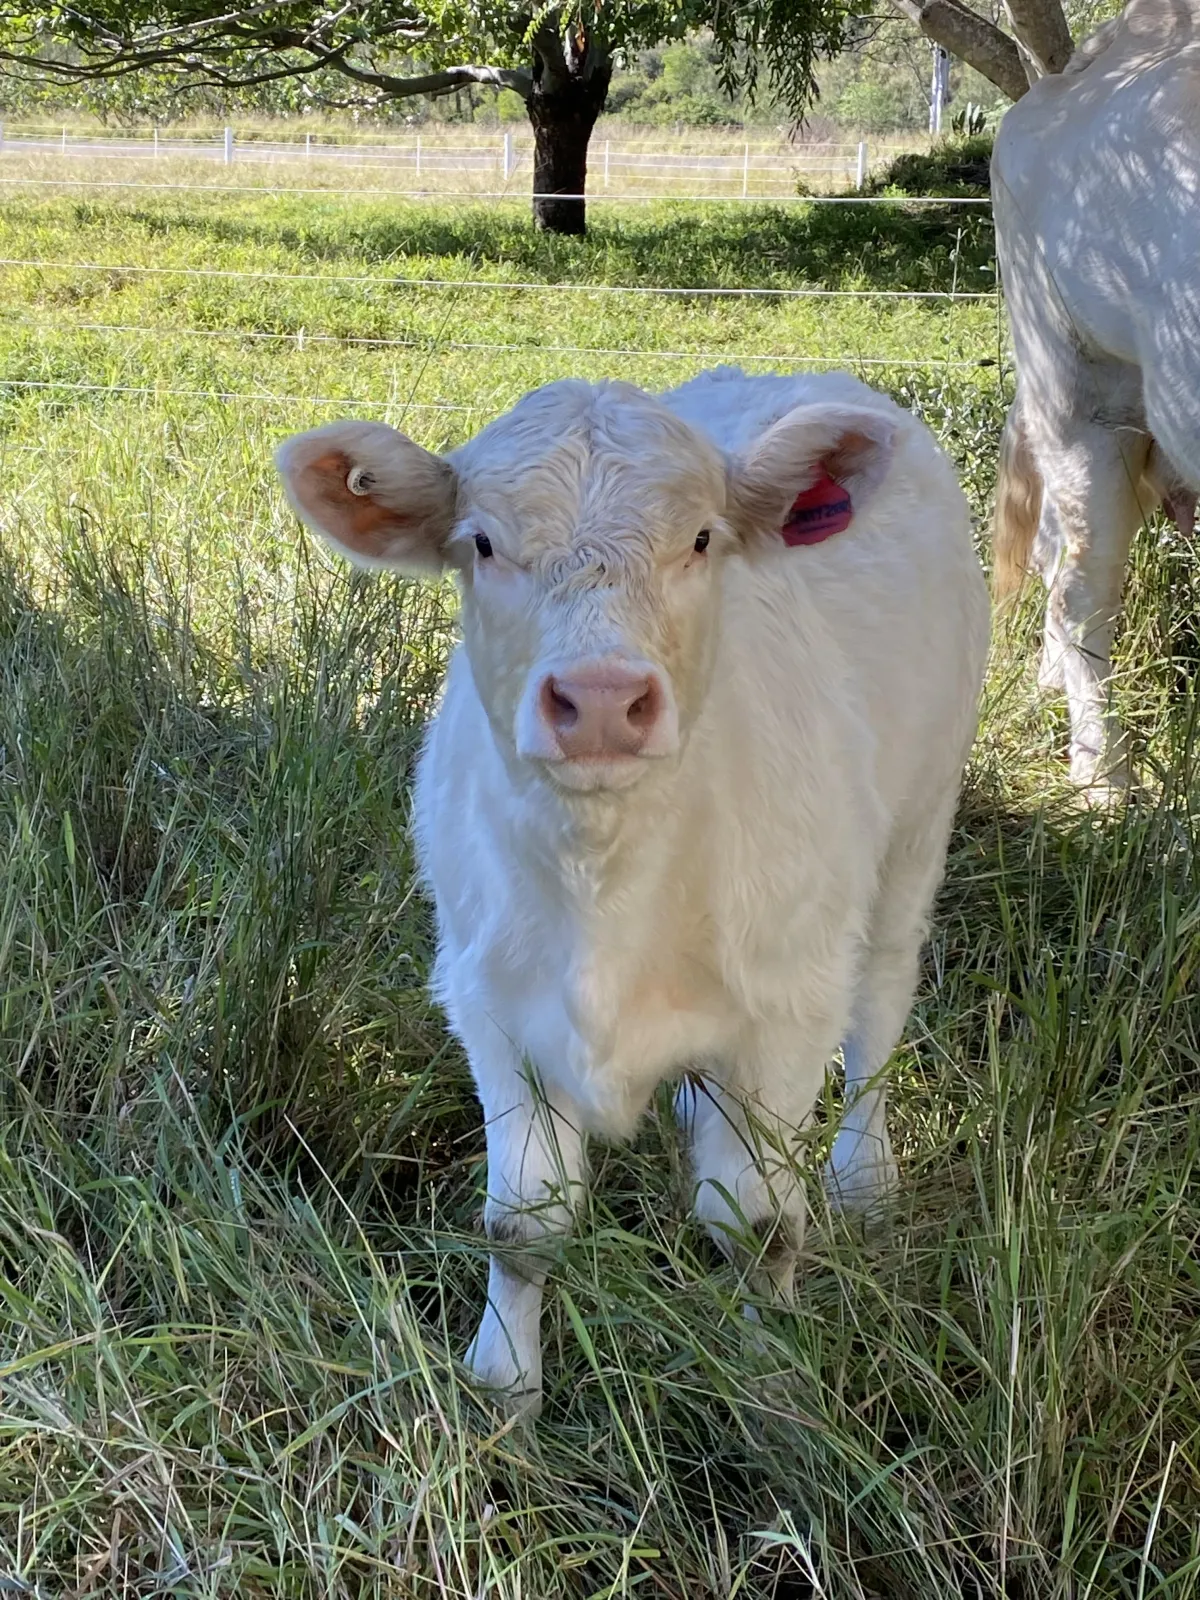 Curious Charolais calf standing in lush grass on a sunny day at Black Duck Charolais farm, showcasing the youthful and vibrant livestock nurtured in South East Queensland's rich pastoral landscape.